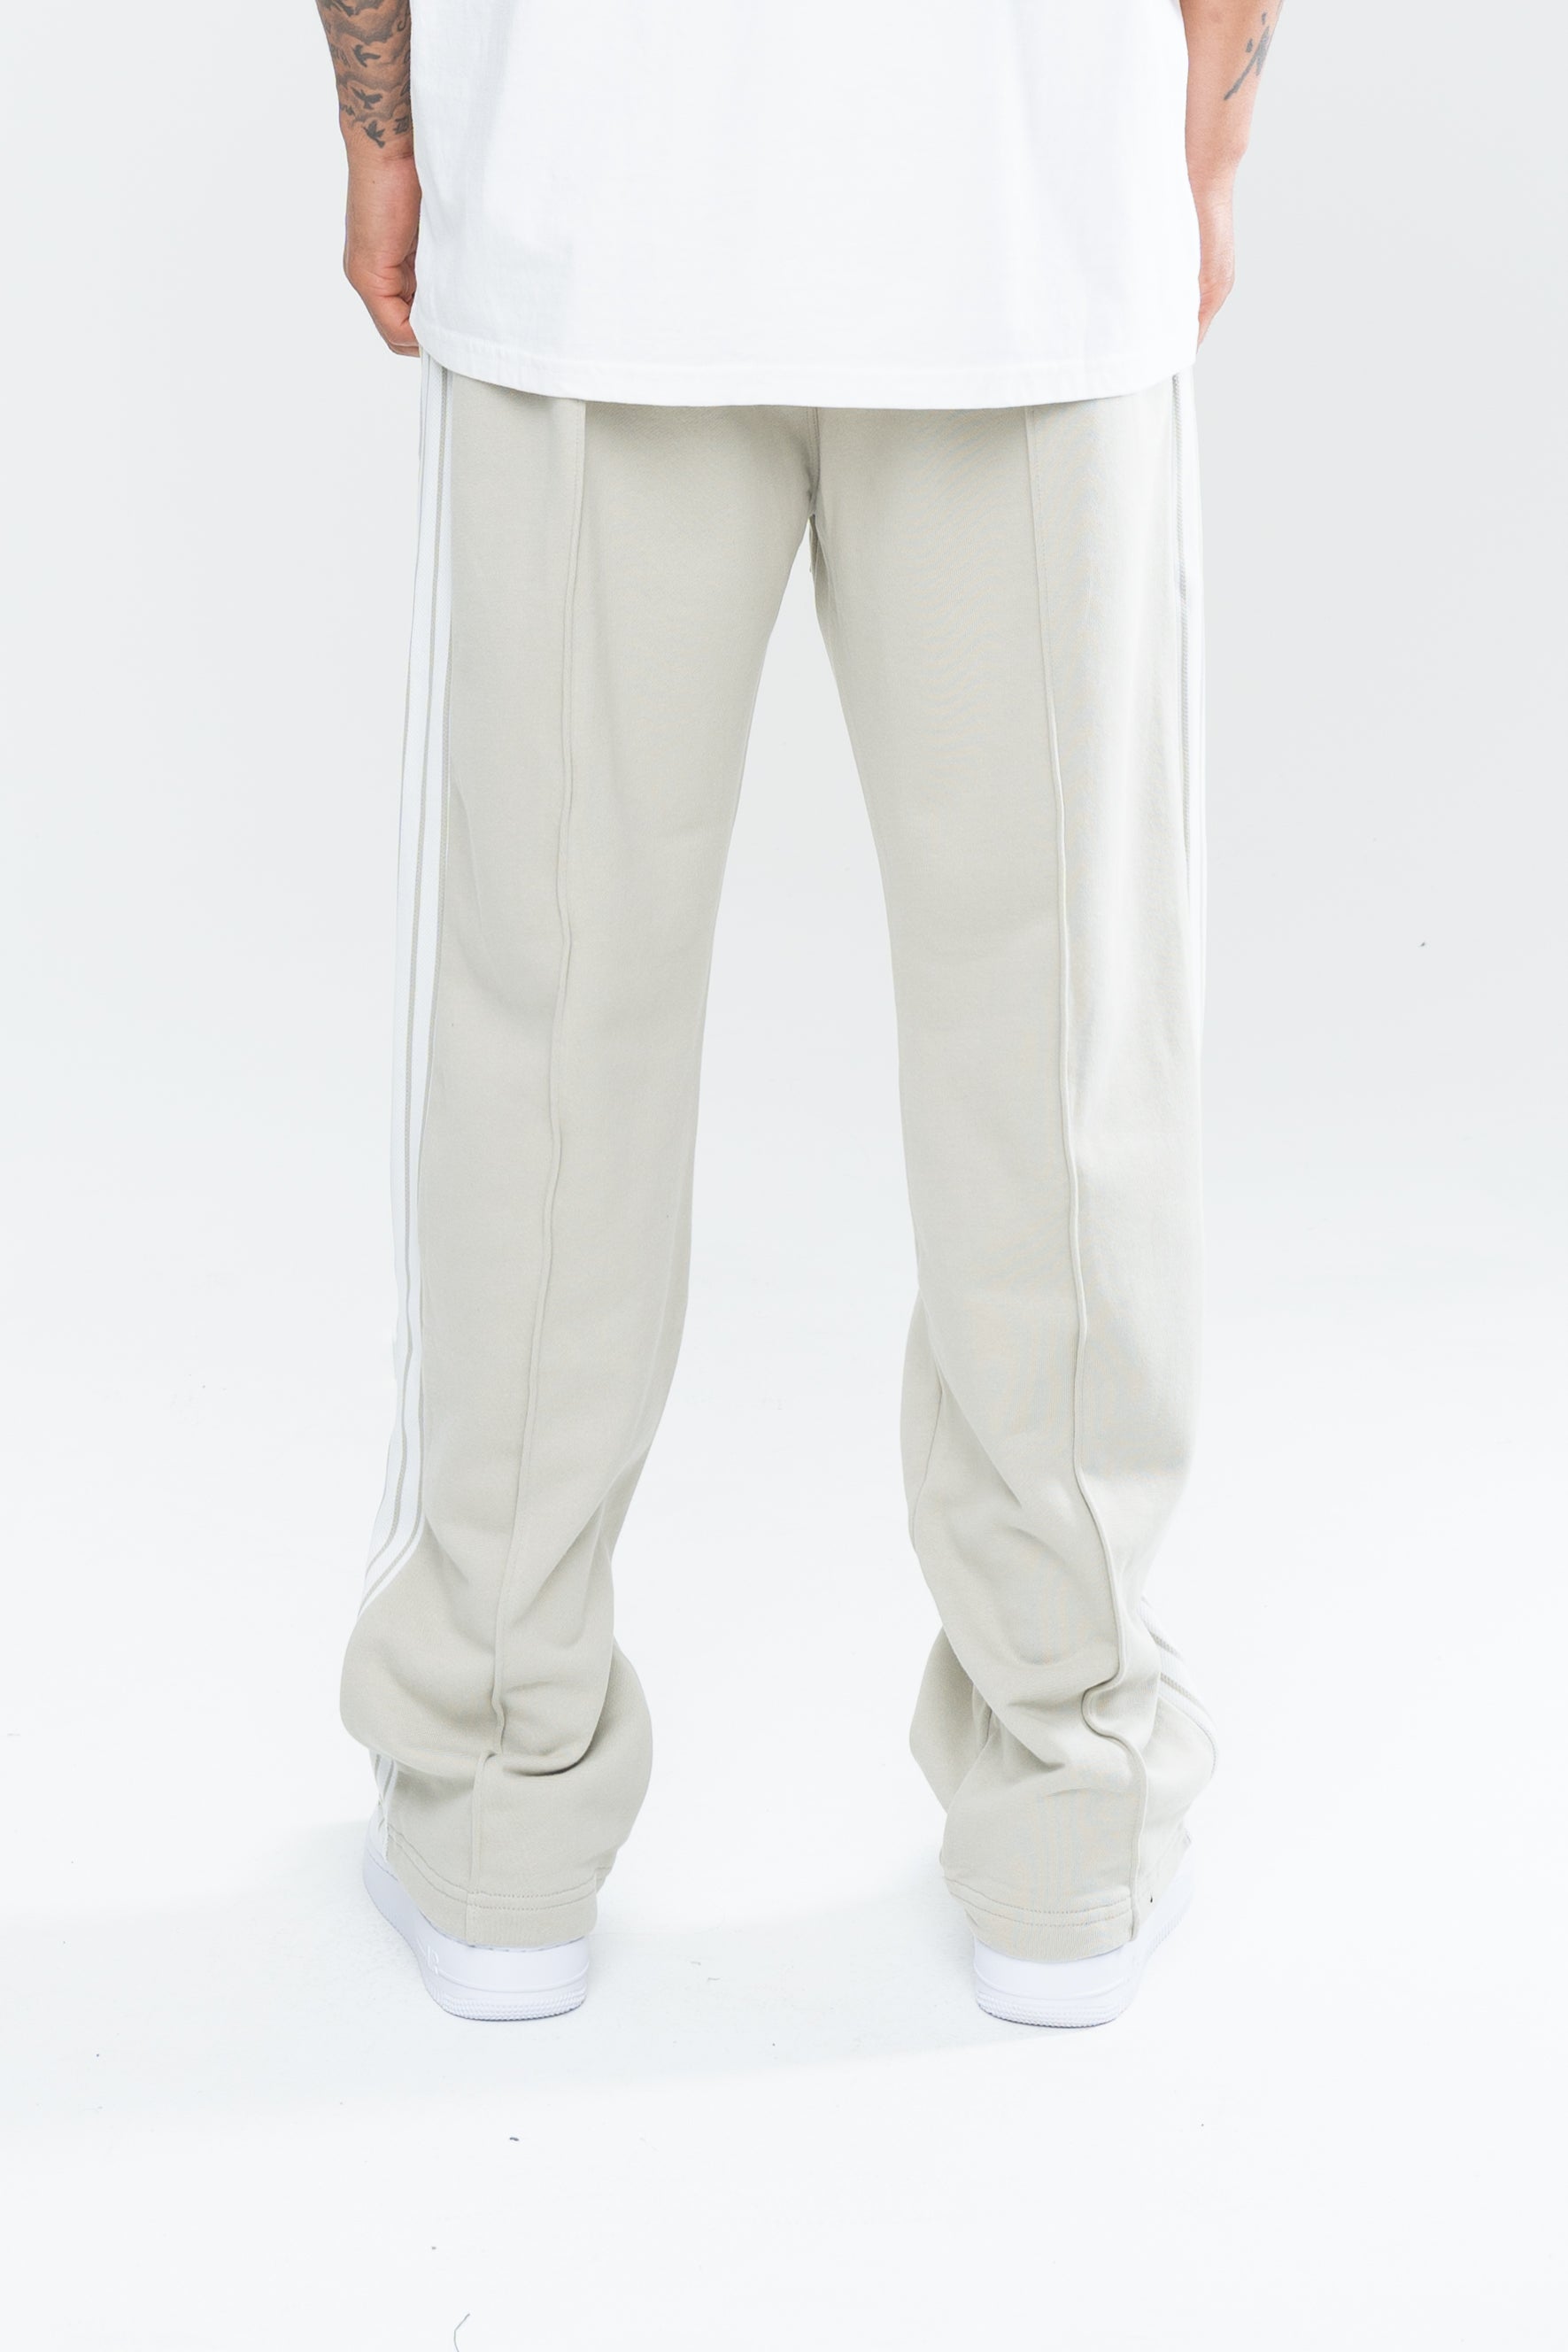 PSTAR RELAXED SWEATS - SAND